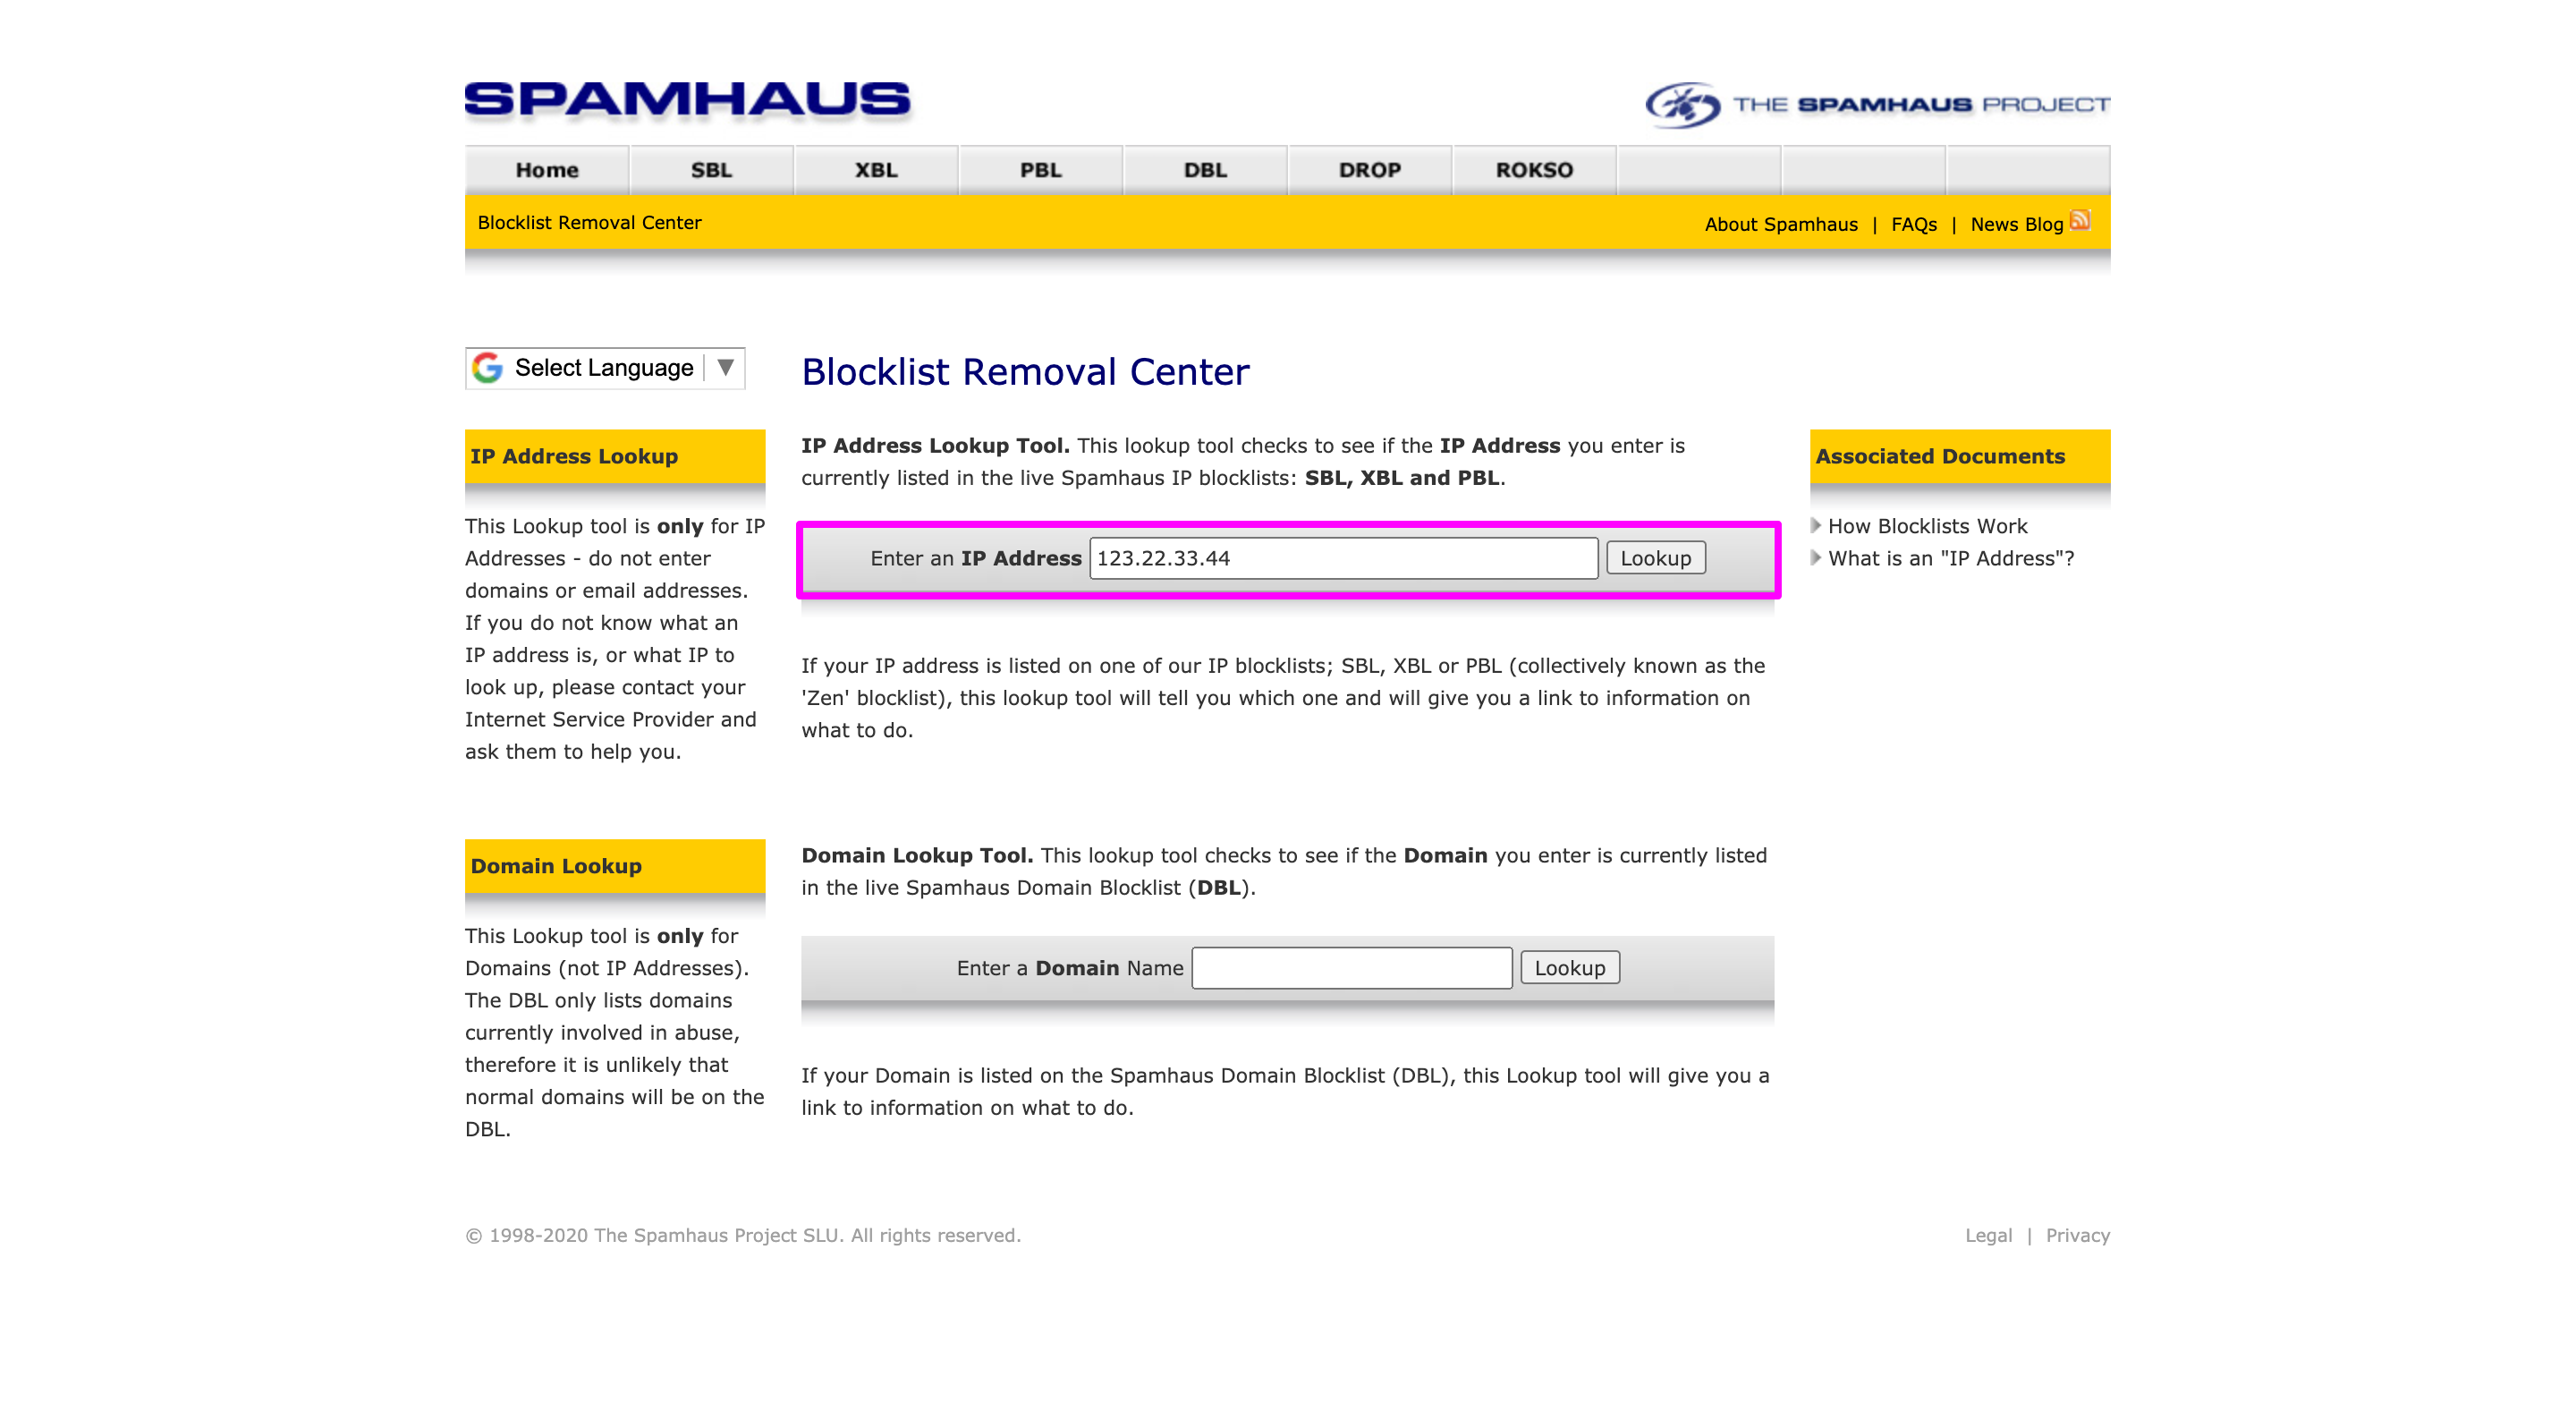 Using Spamhaus, checking the blocklist for both the IP address and domain name.